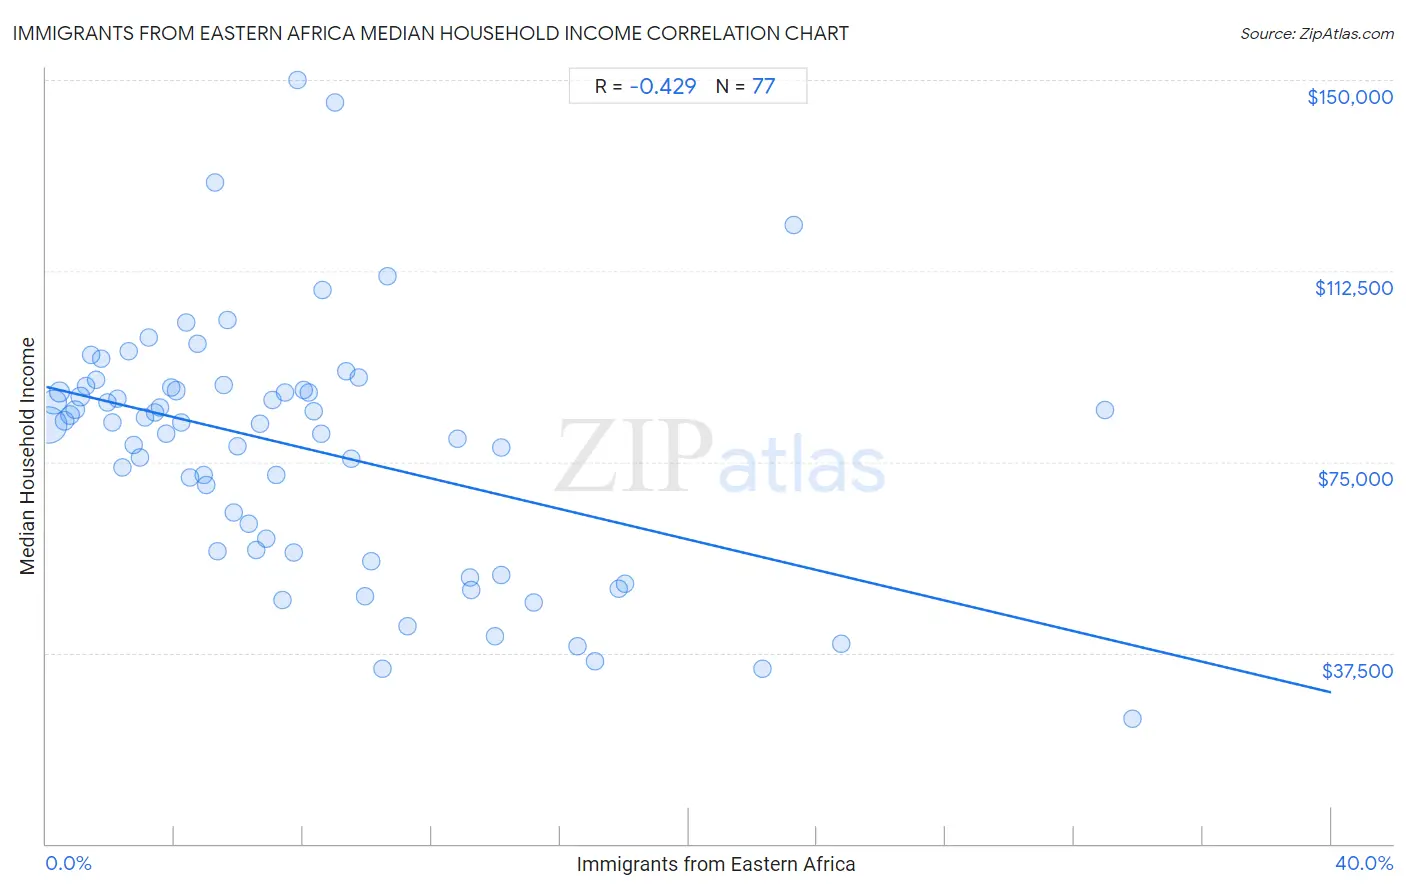 Immigrants from Eastern Africa Median Household Income